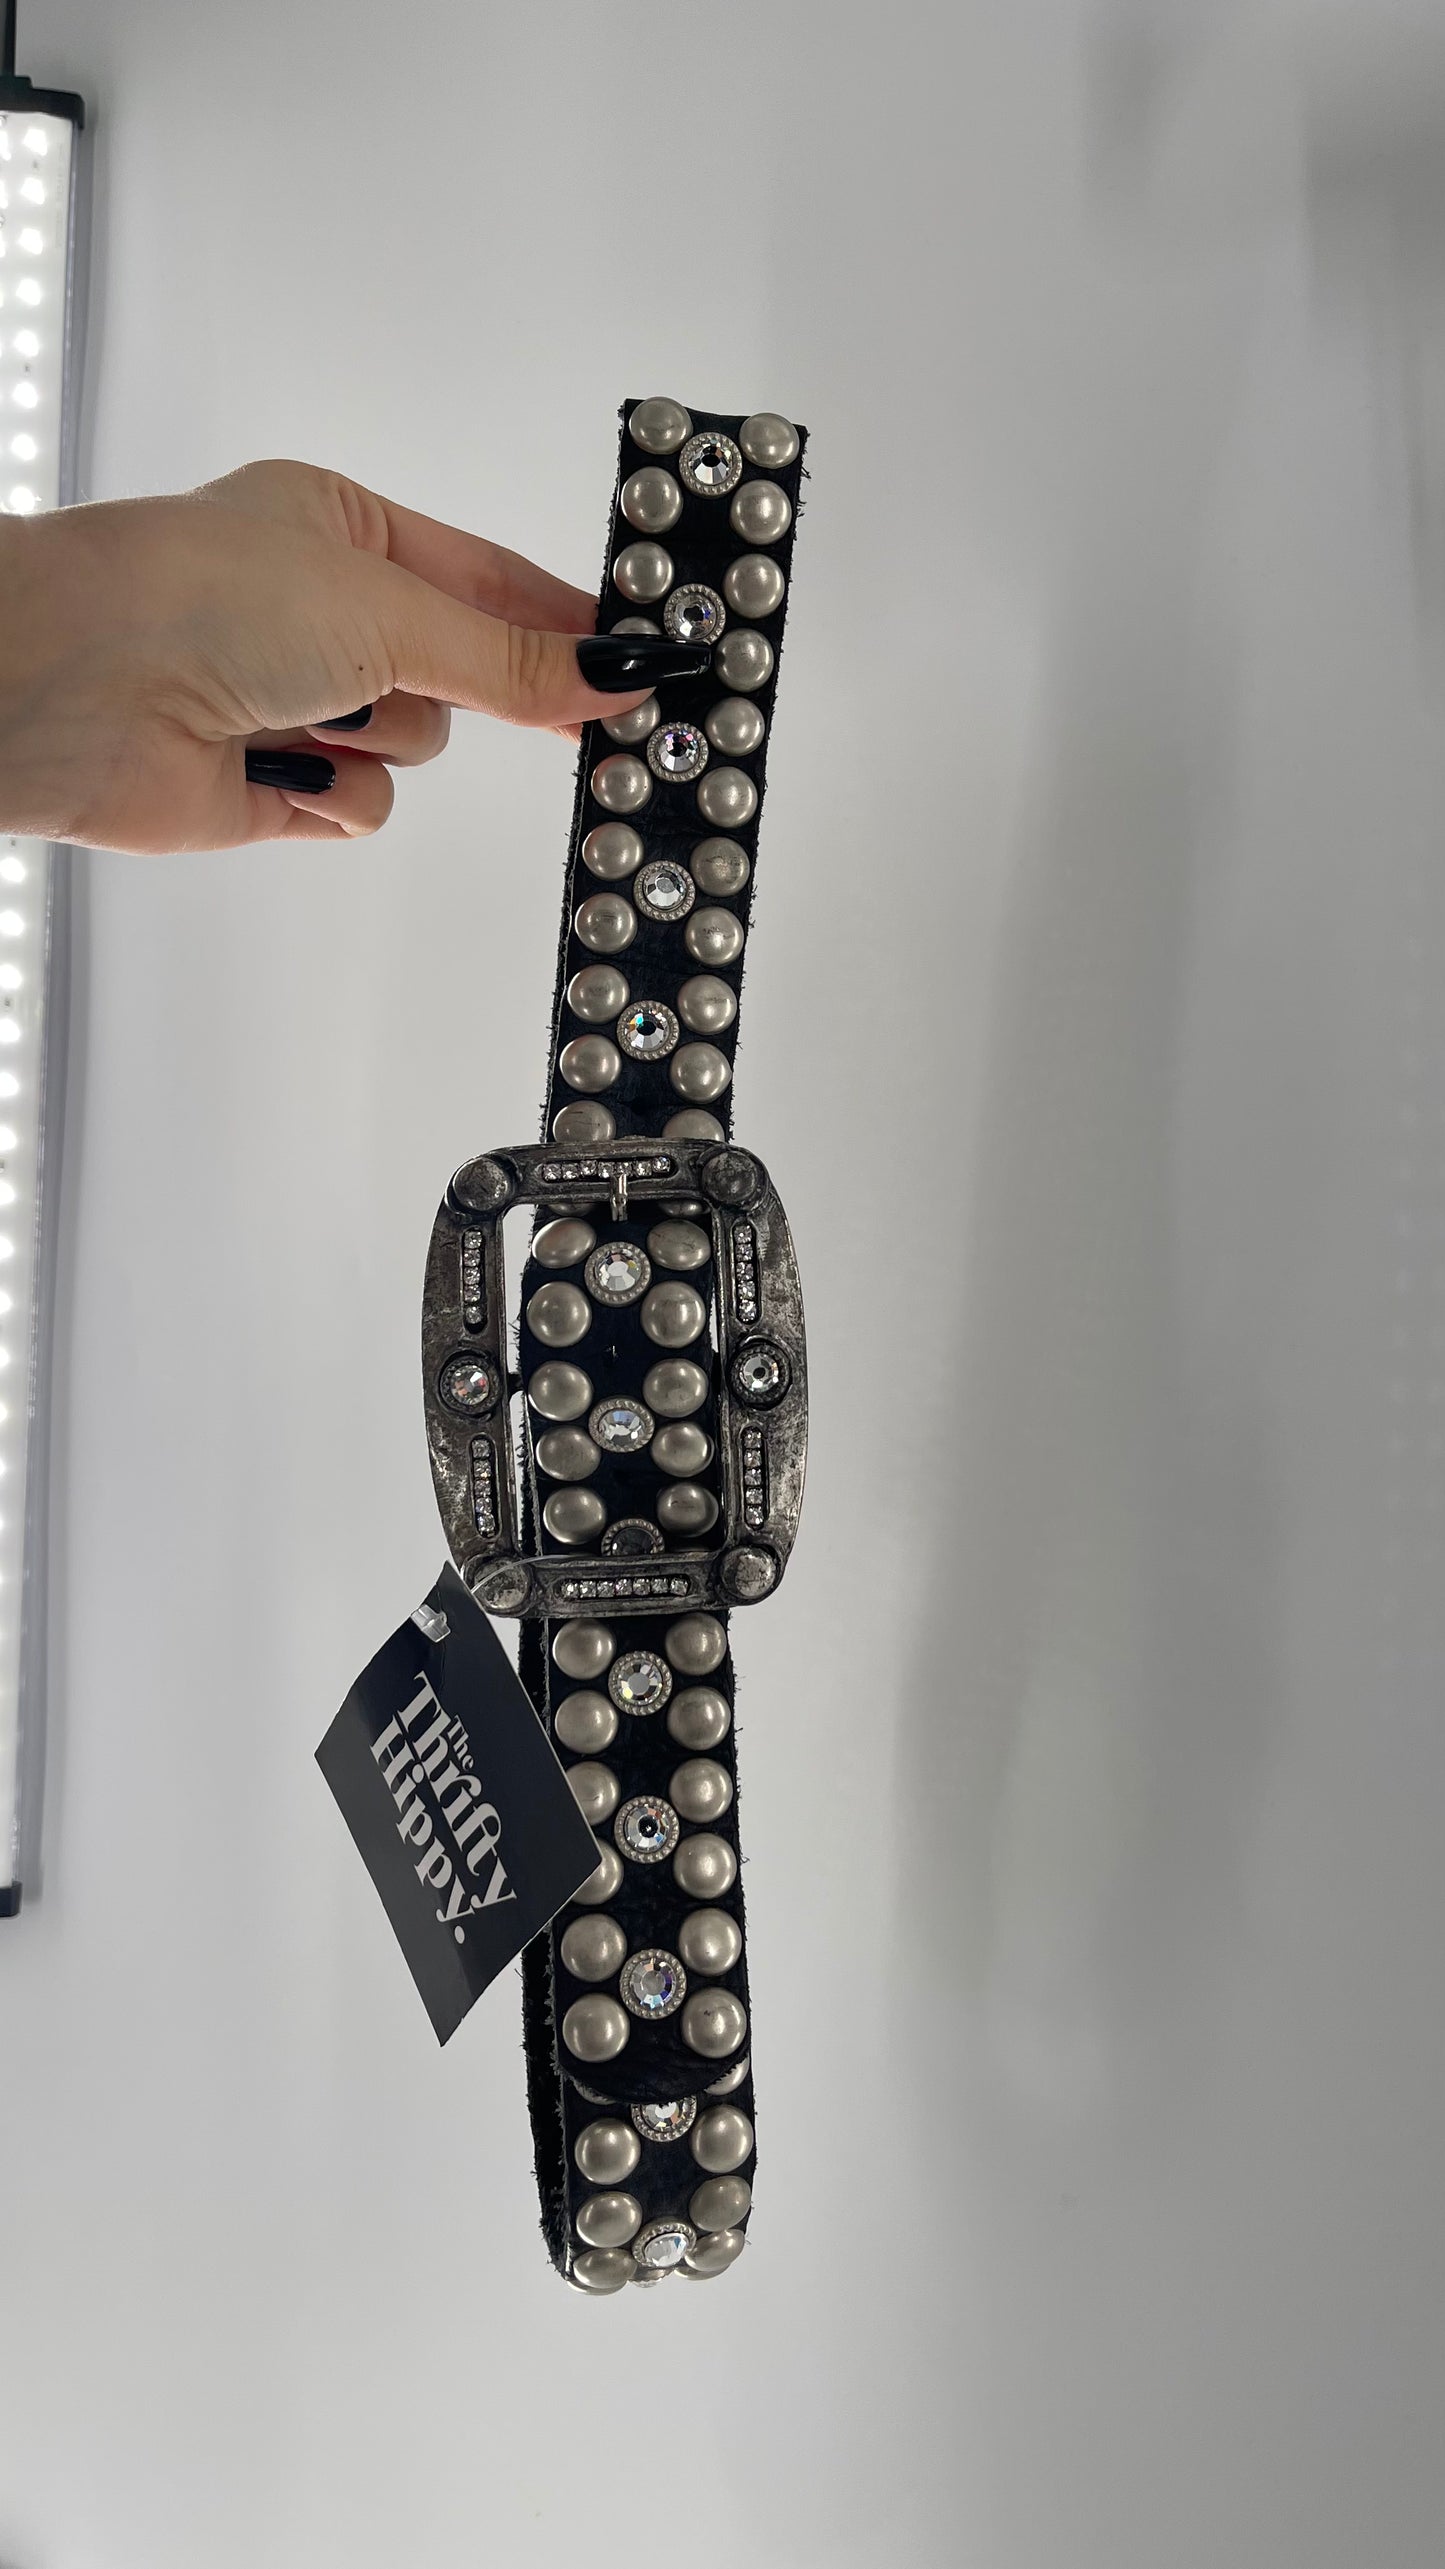 Vintage NEW Swarovski Crystal Iconic Cowboy Belt with Studded Leather Detailing (Small)